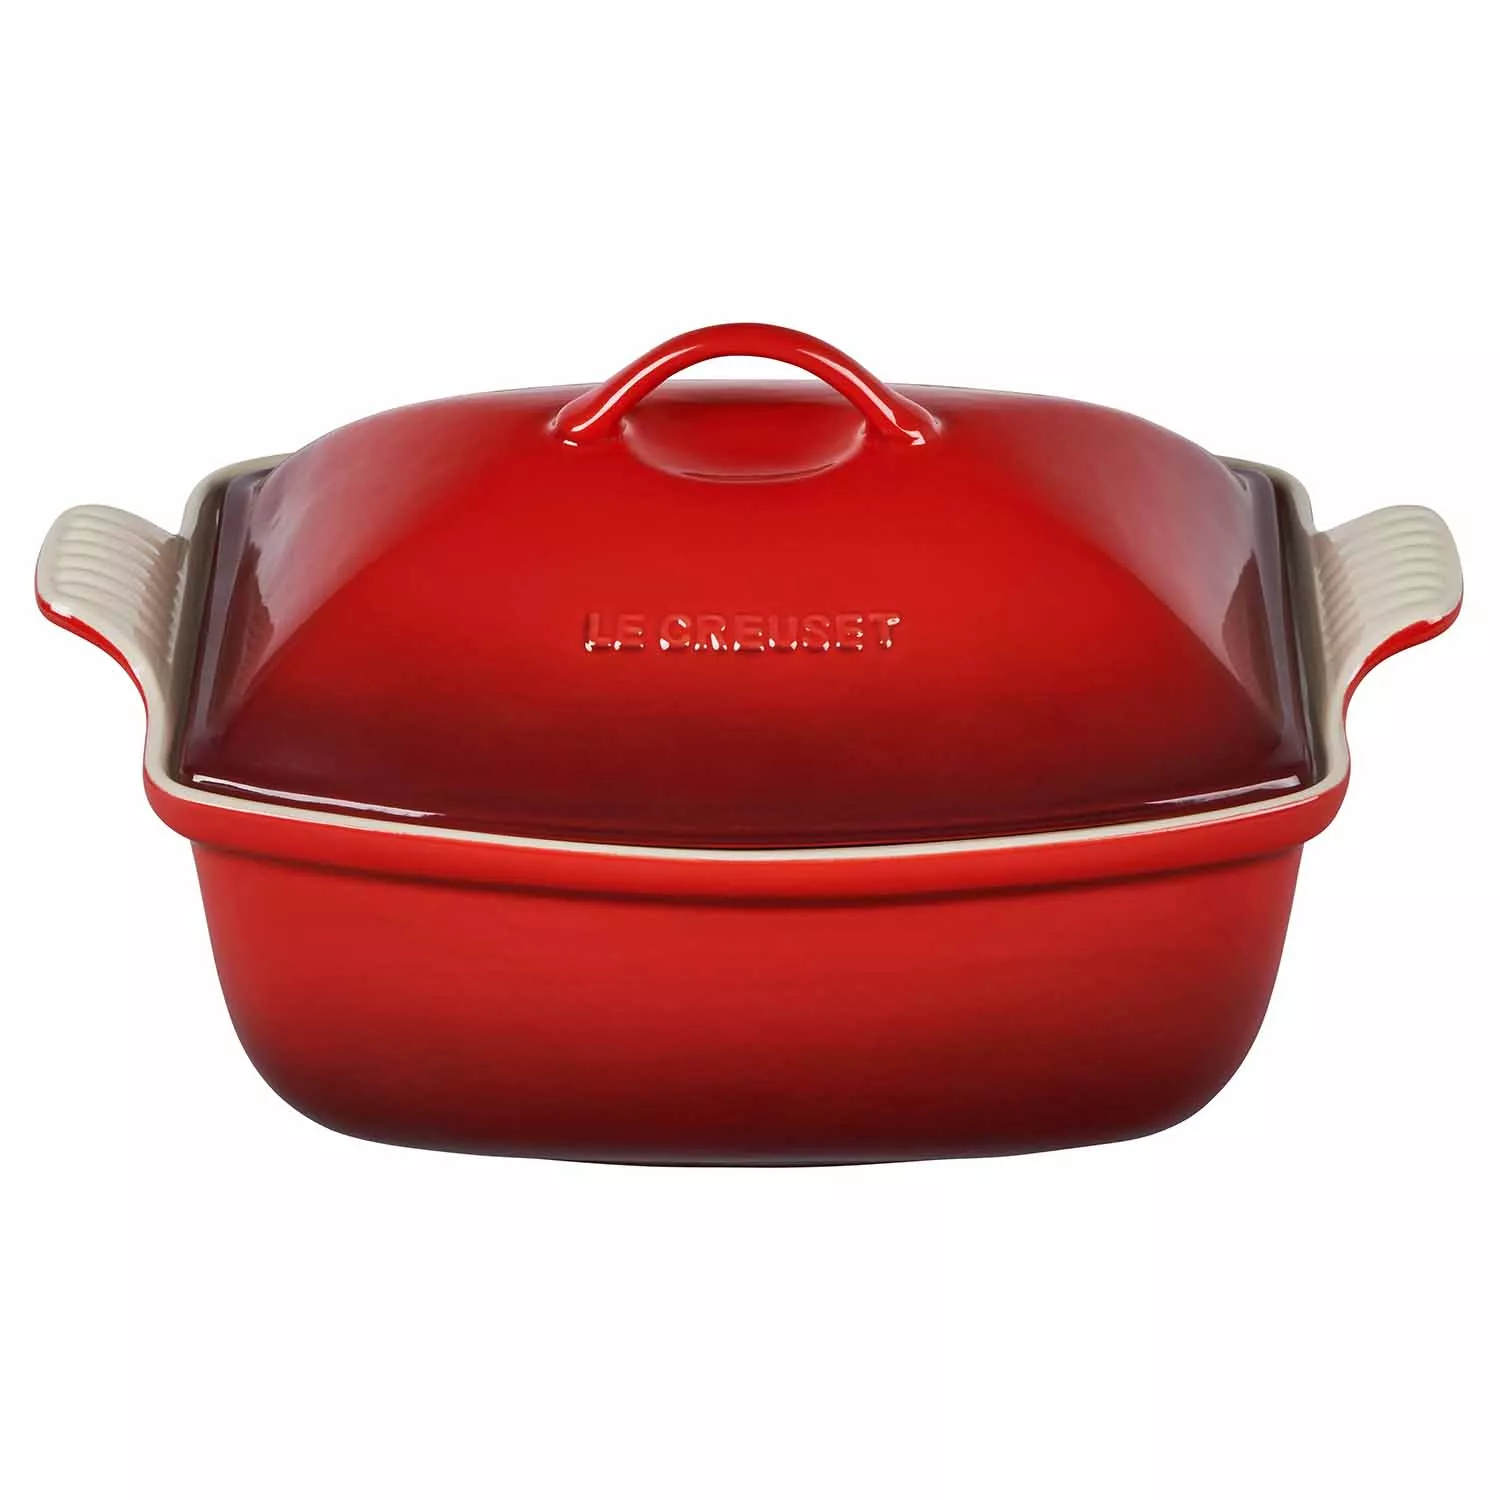 Le Creuset: Bake, Roast, or Broil with the Customer Favorite Fish